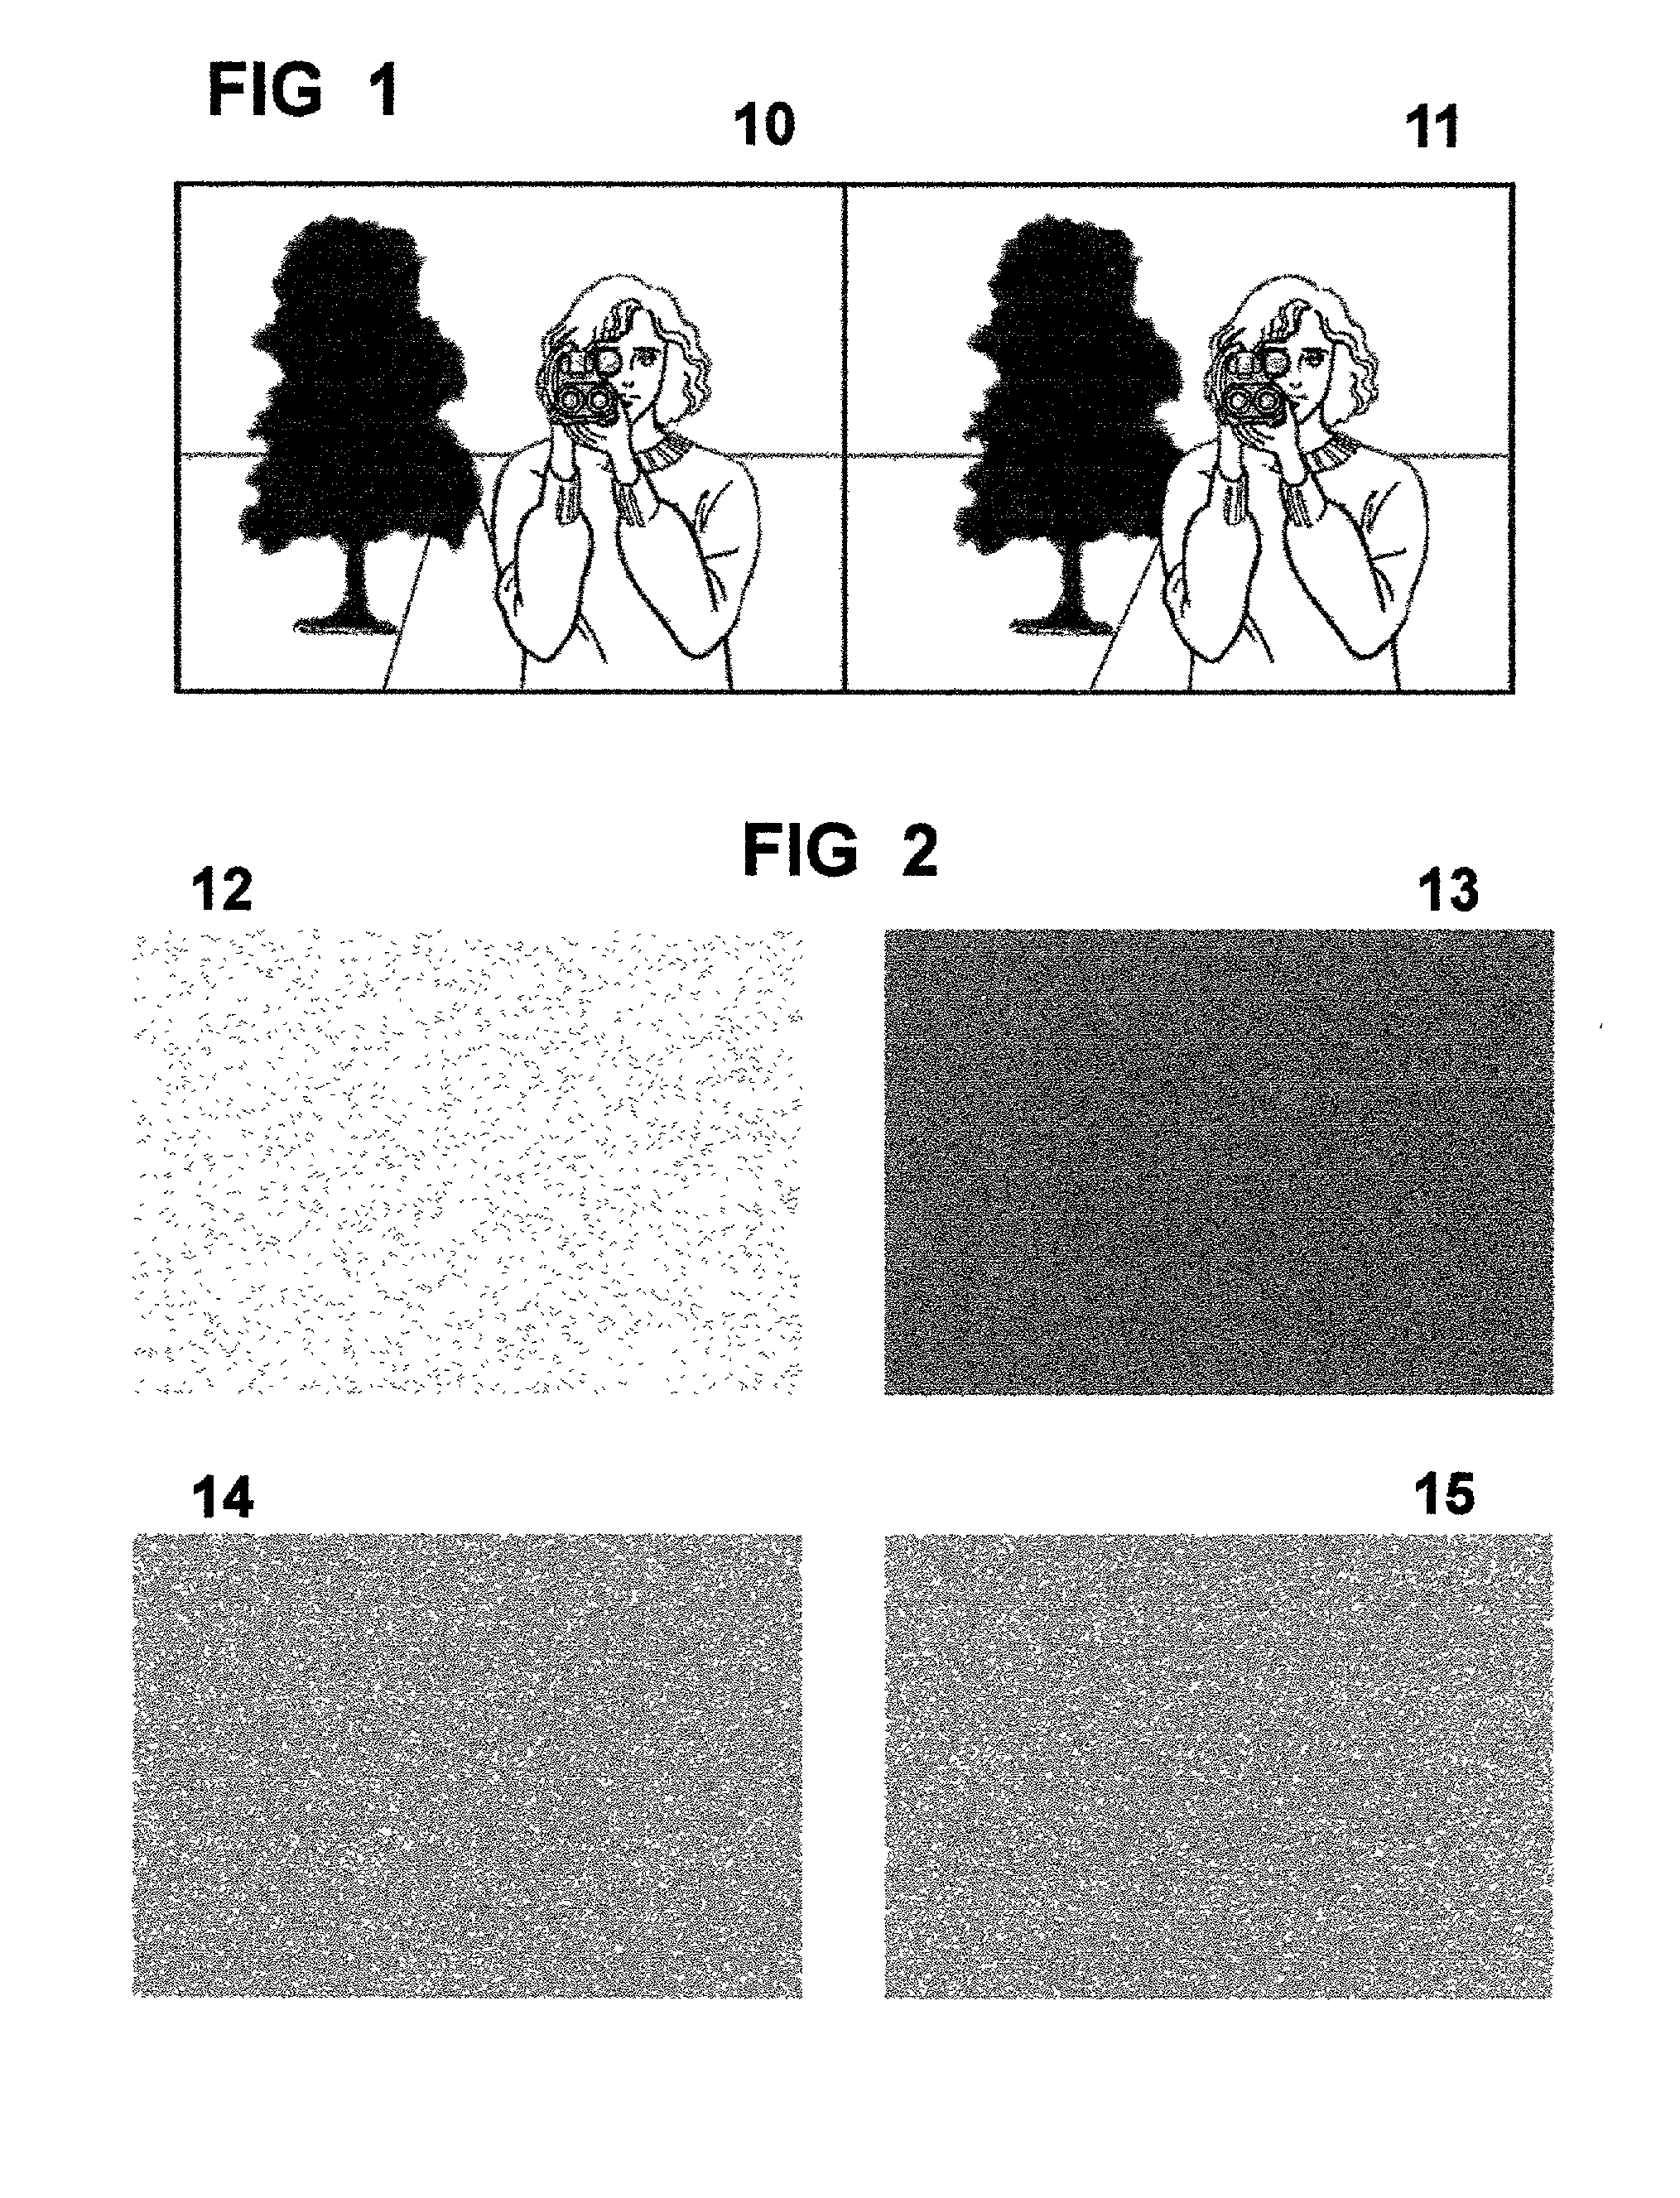 Method and apparatus for producing anaglyphic 3-D images